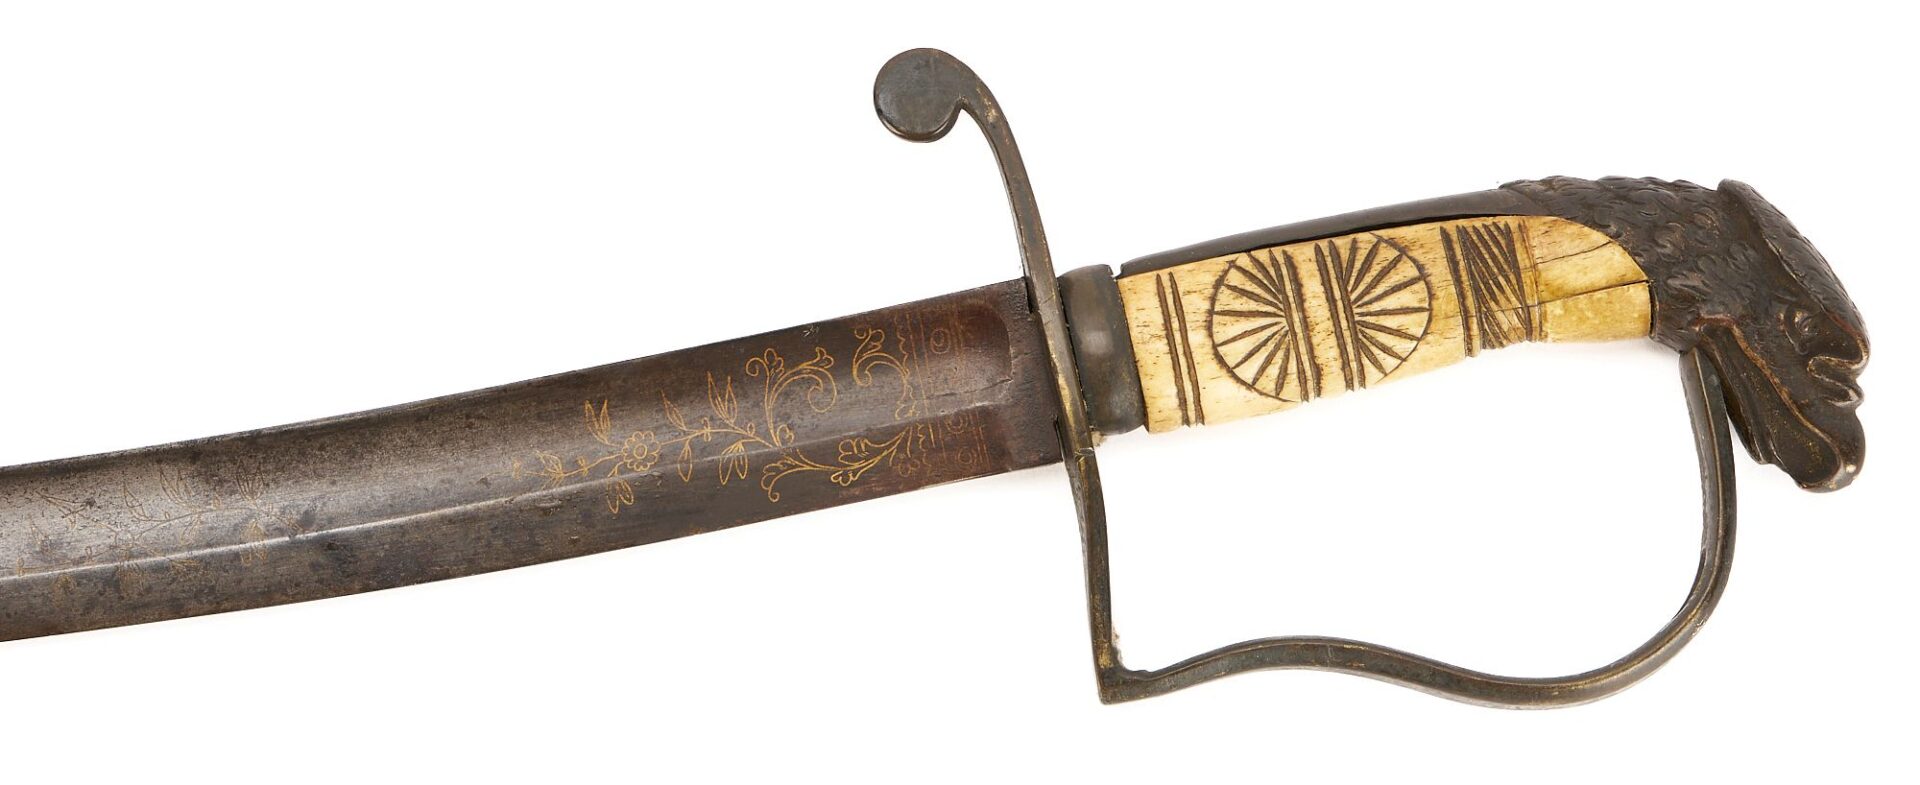 Lot 540: One Eagle Head Sword with Scabbard